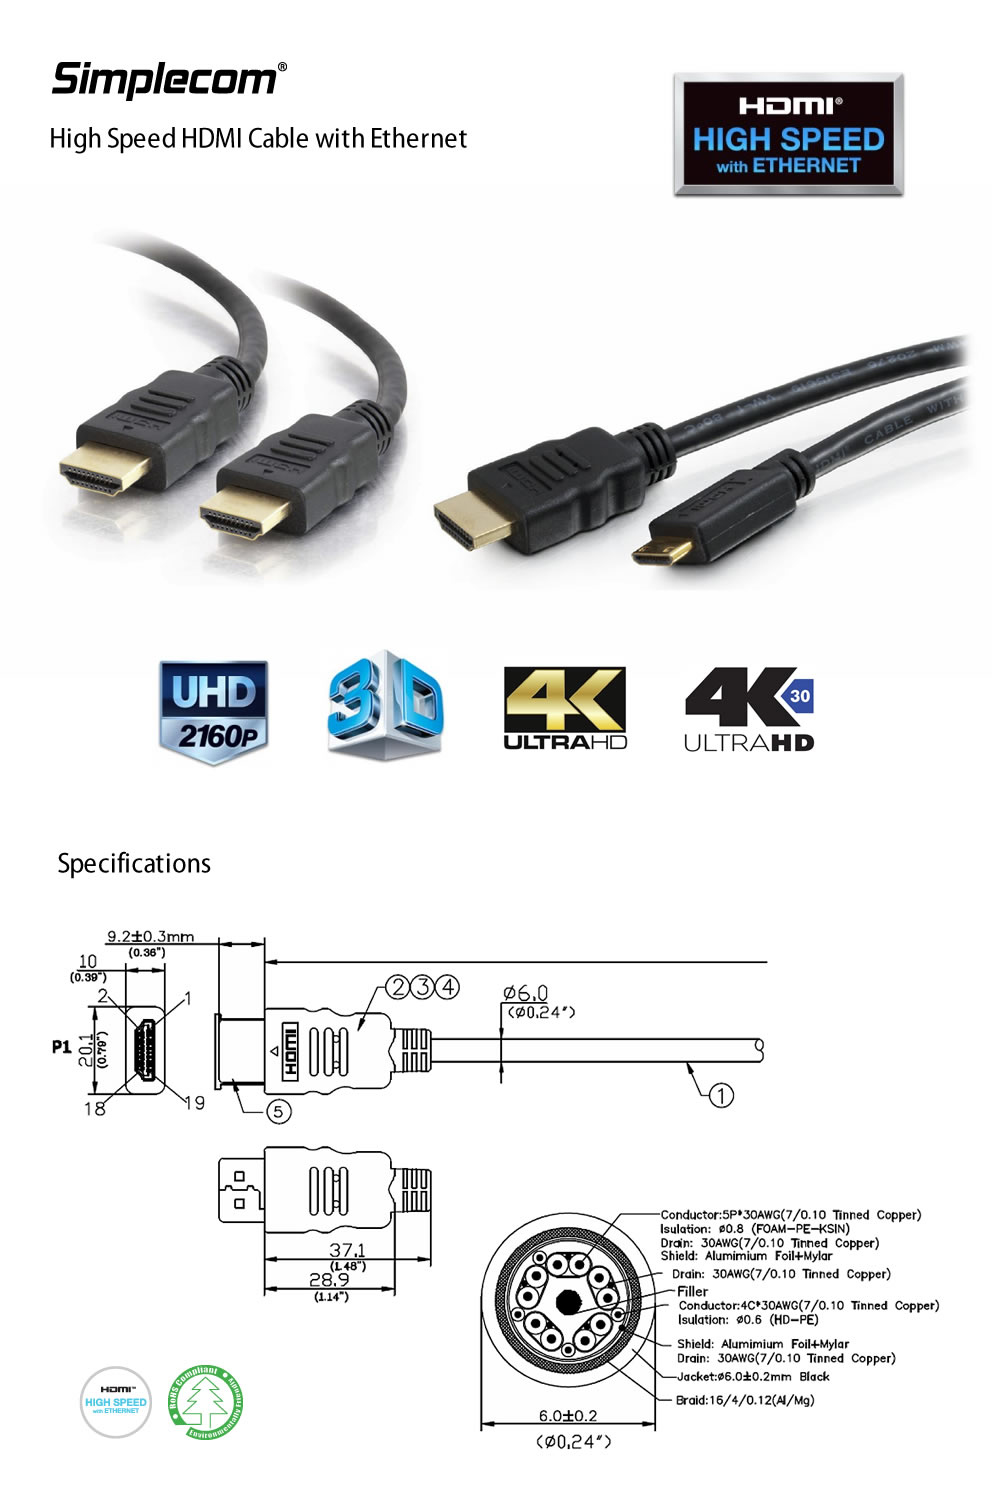 HDMI-Cables-Simplecom-CAH420-High-Speed-HDMI-Cable-with-Ethernet-2m-1